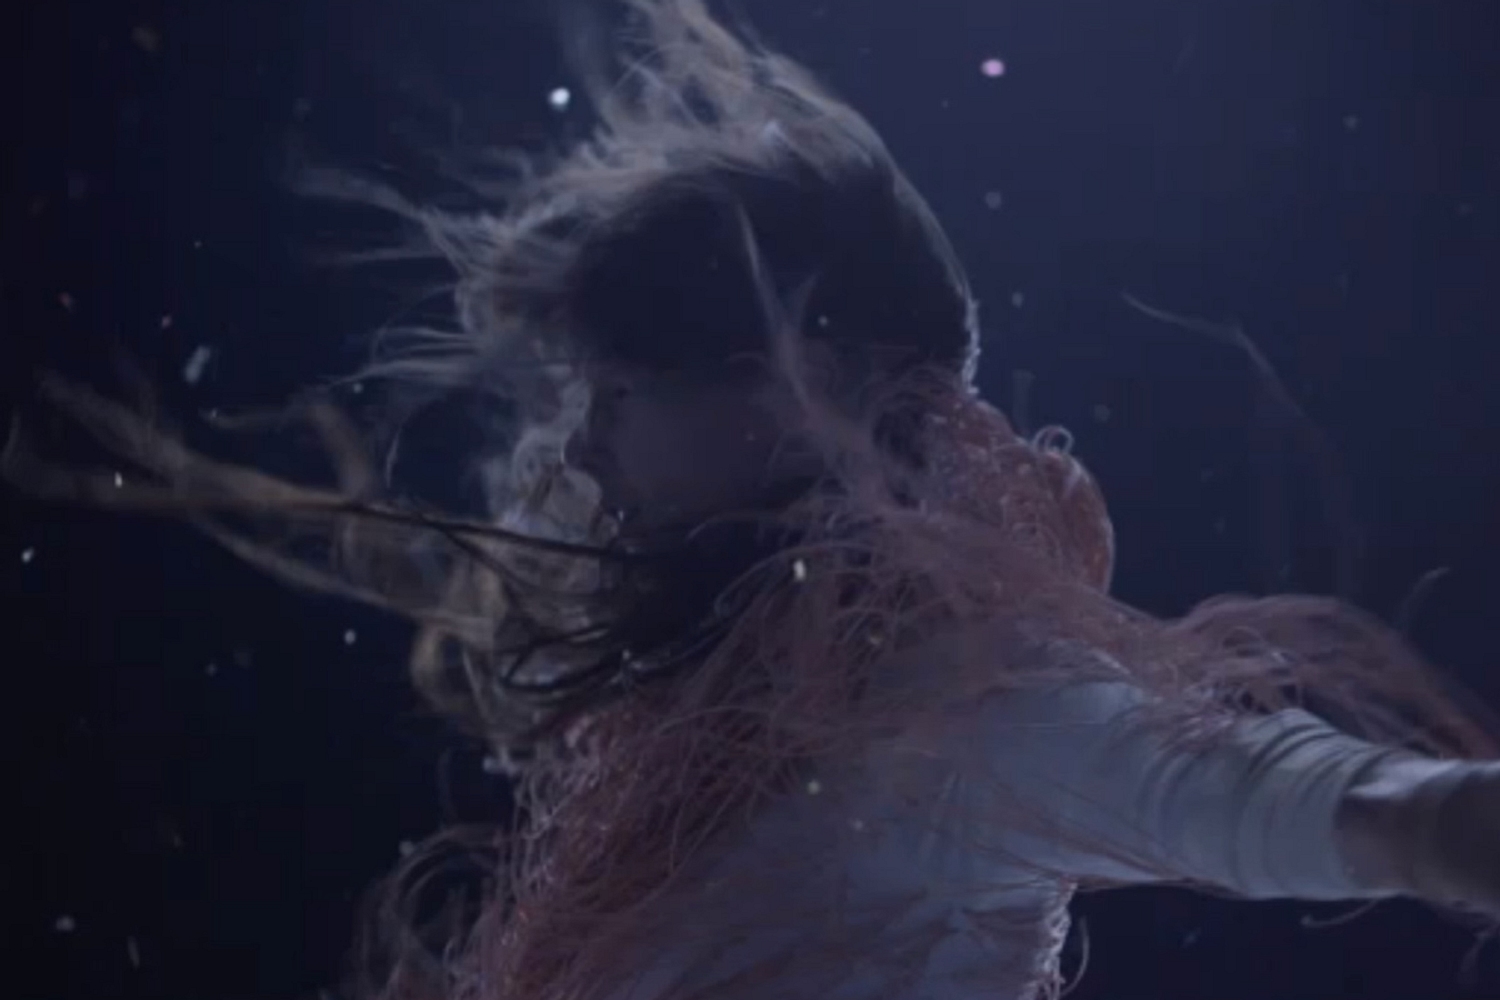 Watch Purity Ring’s video for their single ‘Push, Pull’